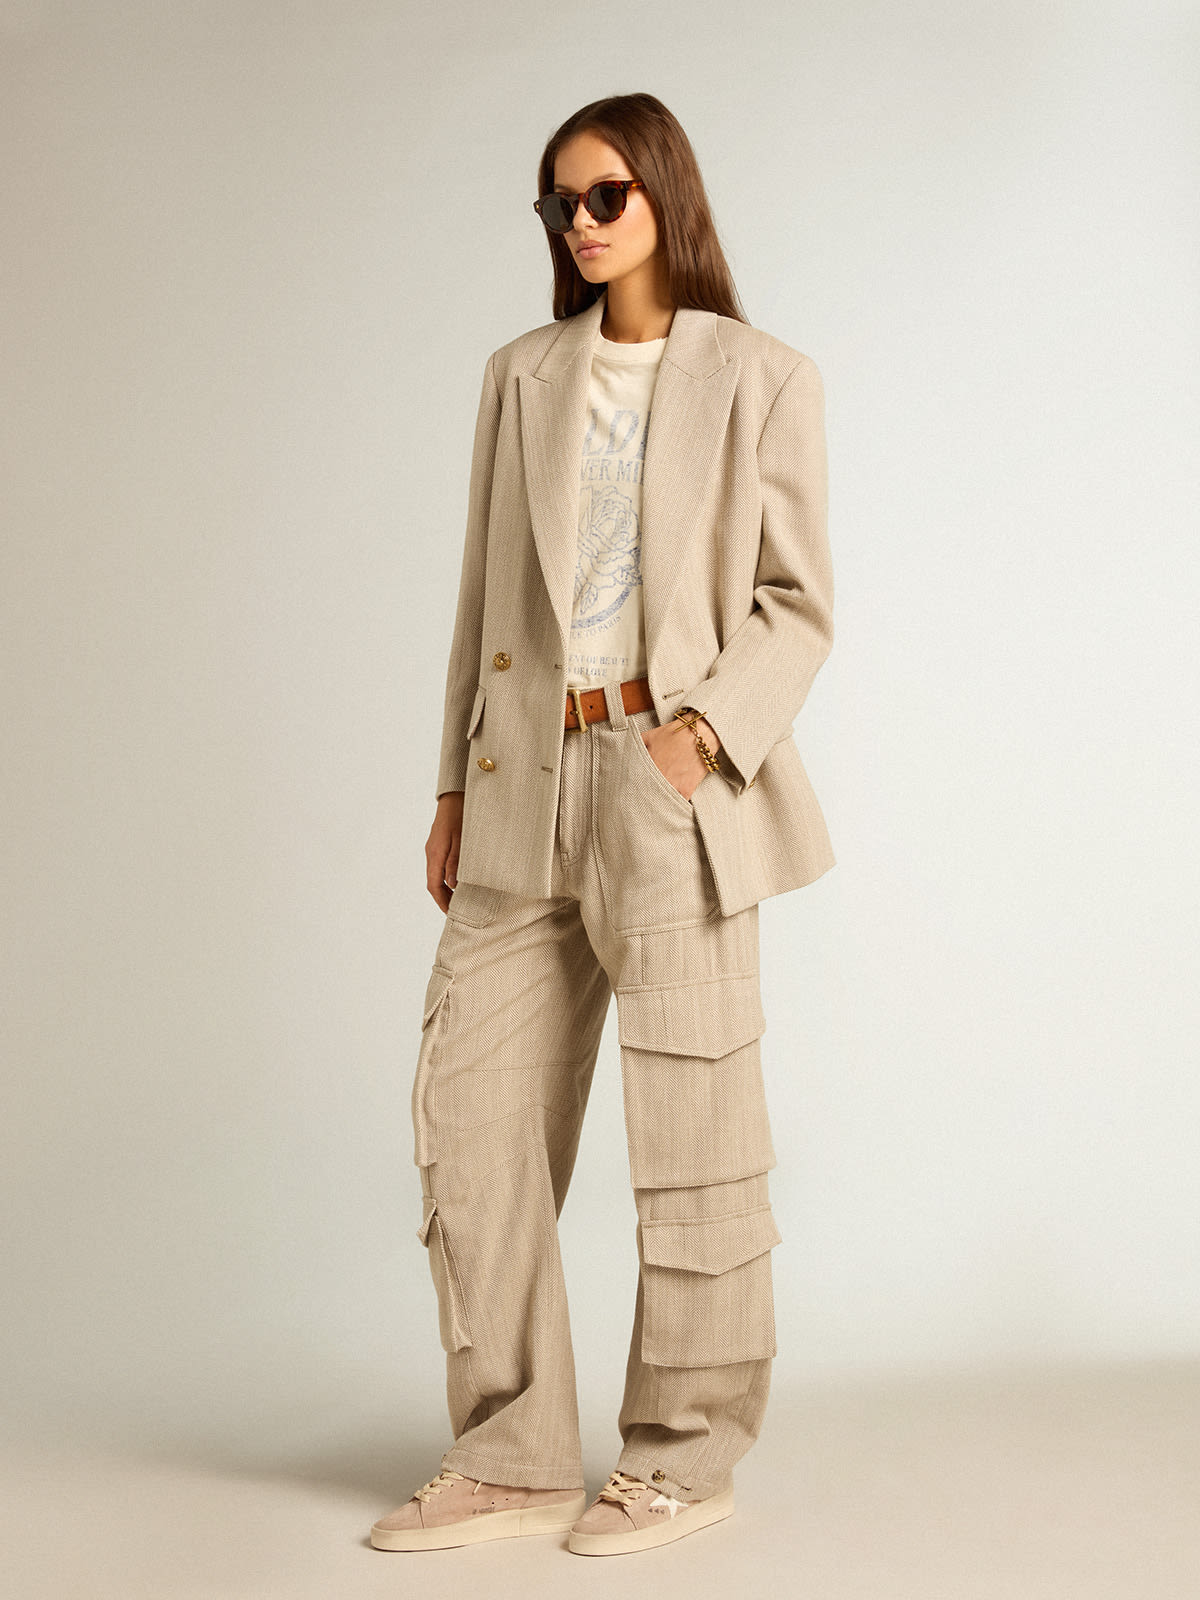 Wide leg corduroy trousers with contrasting stitching - Women's Clothing  Online Made in Italy